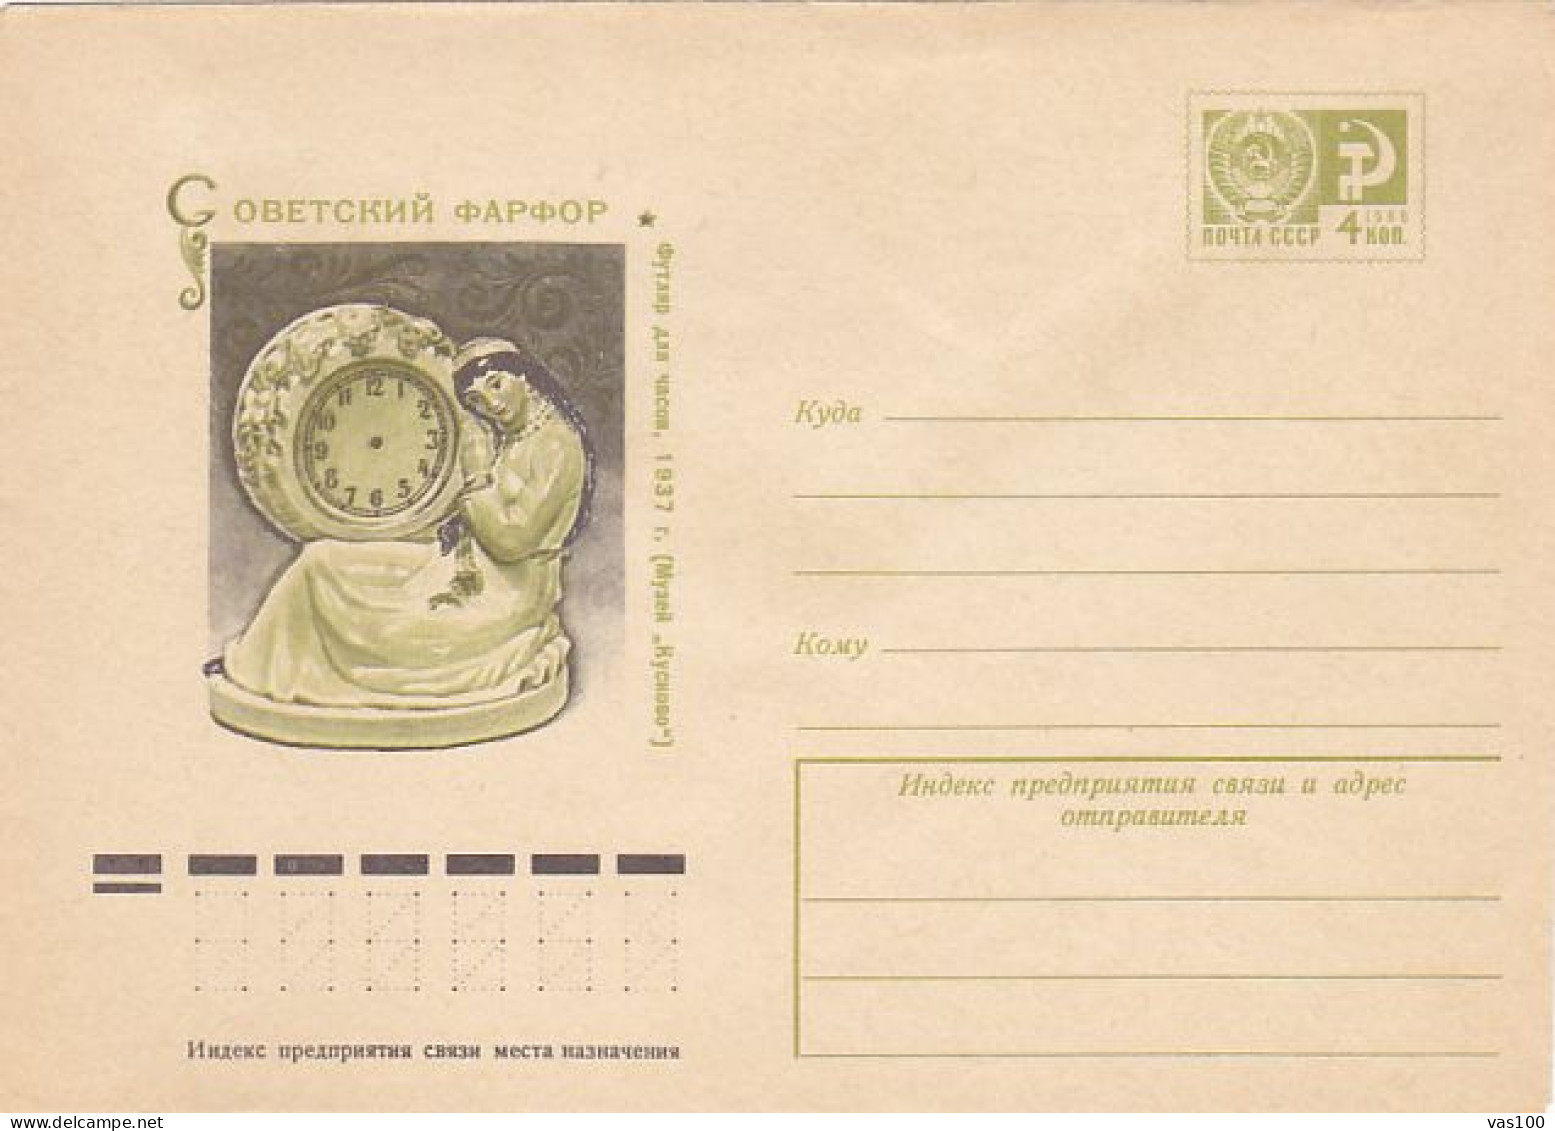 CLOCKS, TABLE CLOCK, COVER STATIONERY, ENTIER POSTAL, 1976, RUSSIA - Horlogerie